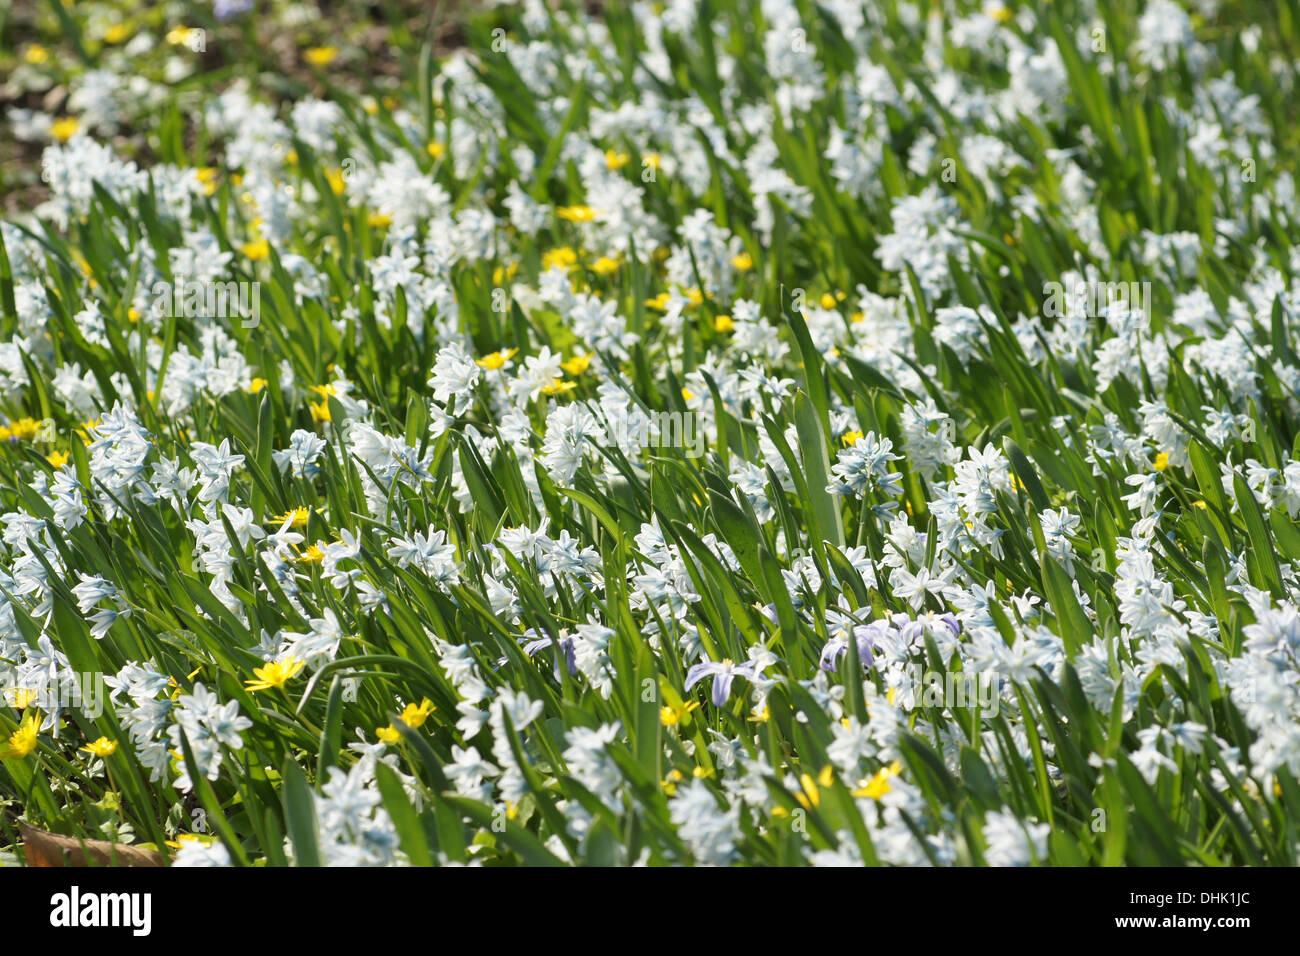 Striped Squills Stock Photo